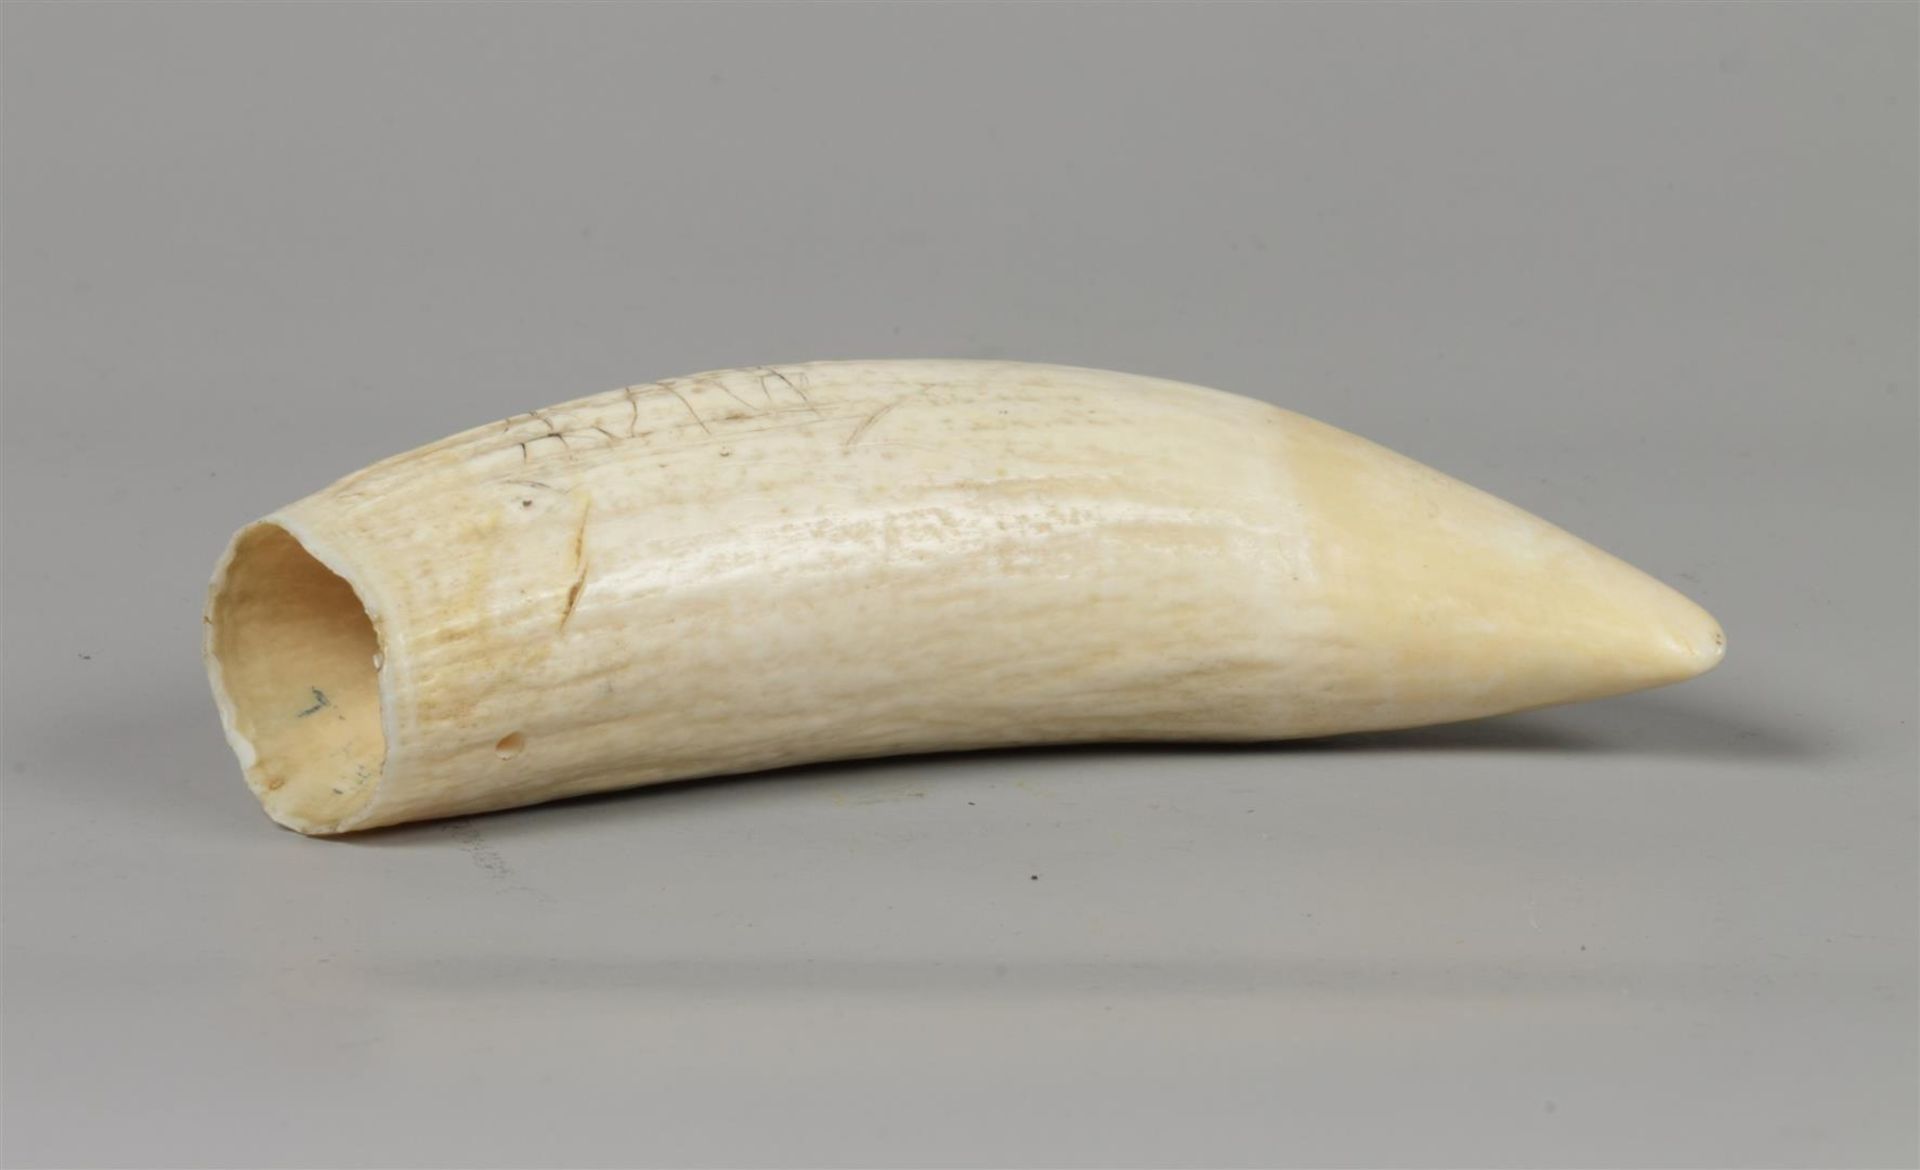 A "scrimshaw" sperm whale tooth with remnants of decoration